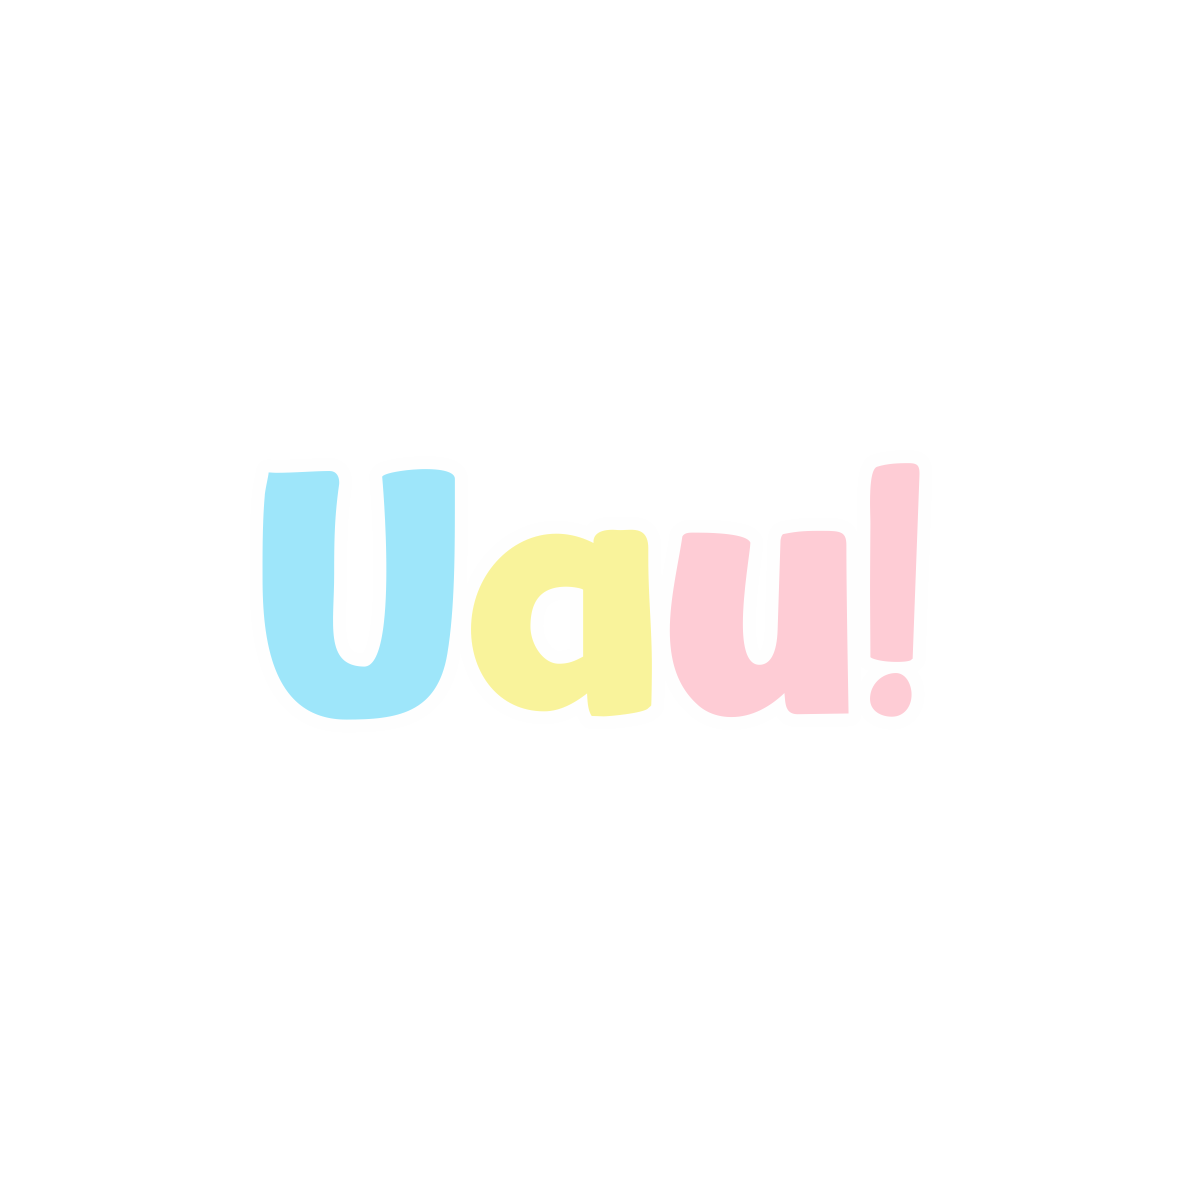 Uau Sticker by Marshmallow Make for iOS & Android | GIPHY